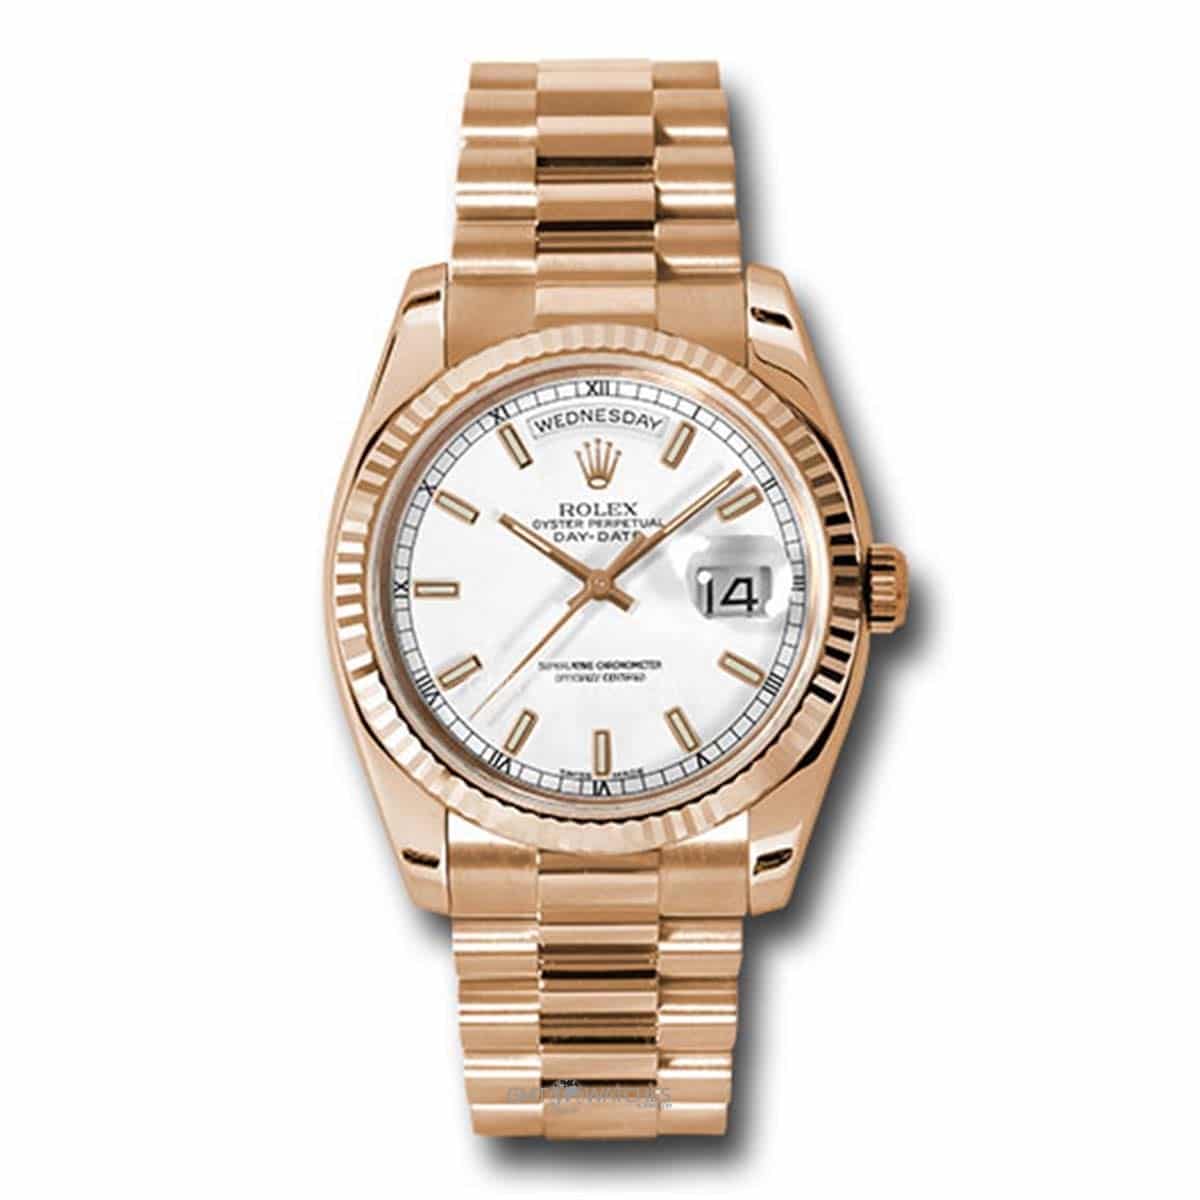 Rolex Oyster Perpetual Day-Date 36mm 18k Rose Gold Fluted Bezel 118235 wsp